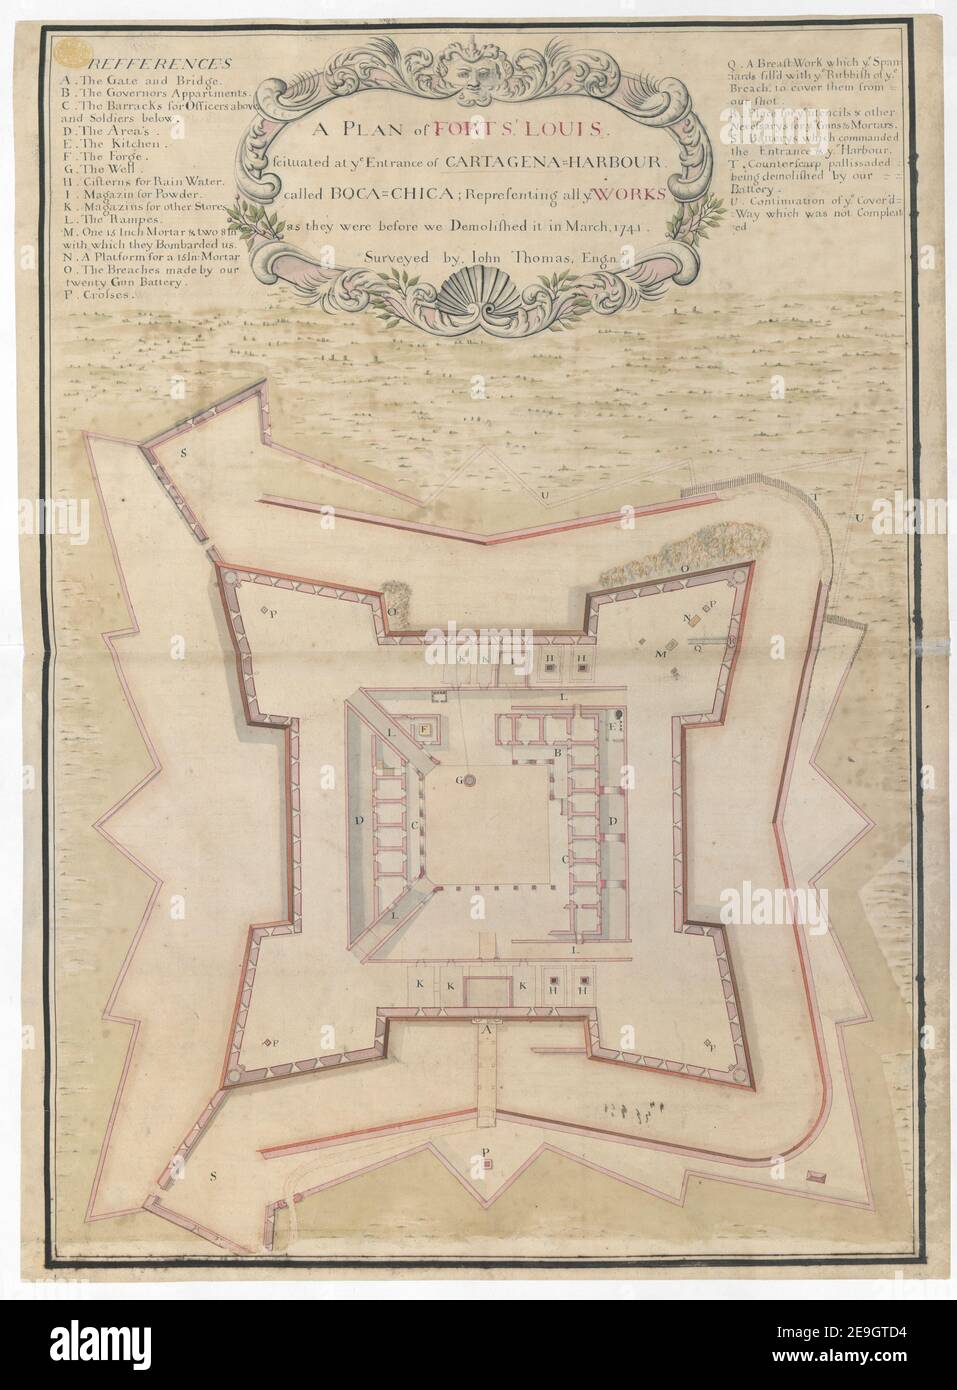 A PLAN OF FORT St. LOUIS. Scituated at ye Entrance of CARTAGENA HARBOUR. called BOCA CHICA Representing all ye WORKS as they were before we Demolished it in March. 1741.  Author  Thomas, John 124.32. Place of publication: [Cartagena?] Publisher: [Iohn Thomas] Date of publication: [1741.]  Item type: 1 map Medium: ink and wash over pencil Dimensions: 70 x 49 cm  Former owner: George III, King of Great Britain, 1738-1820 Stock Photo